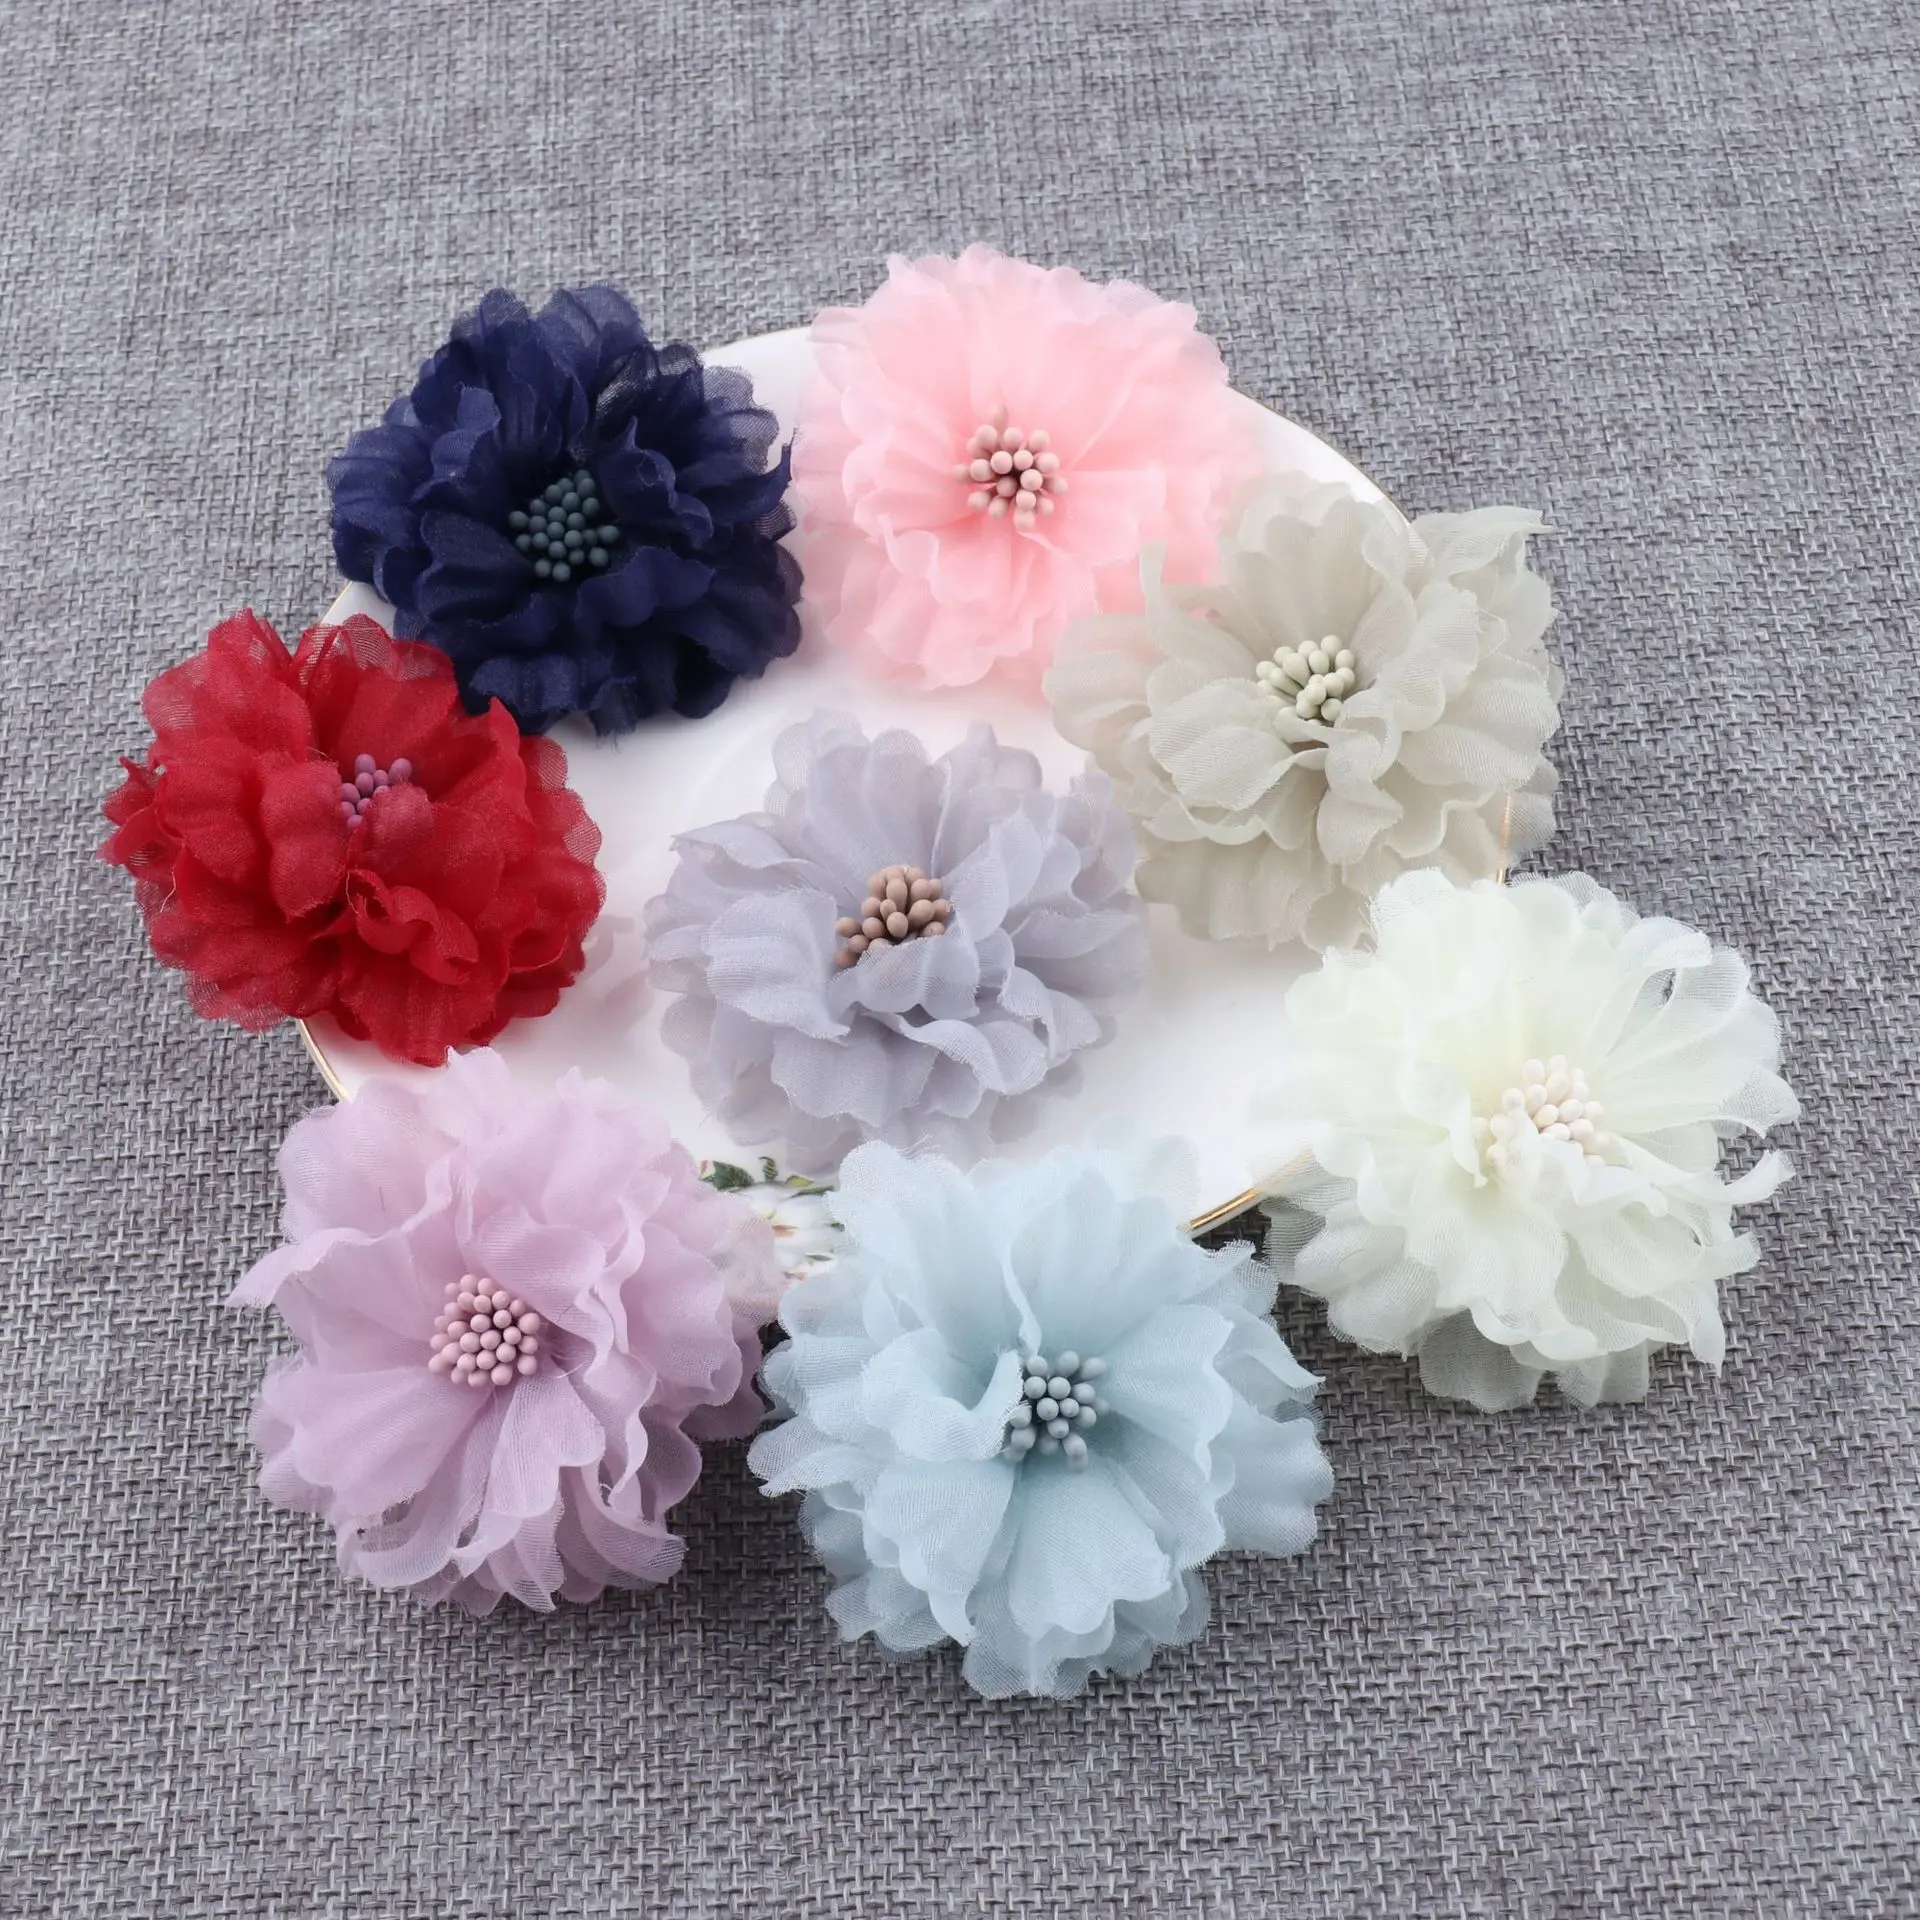 100pcs Fabric Artificial Lace Flower Chiffon Flower For Hair Accessories Headband Patch Applique Wedding Dress DIY Shoes Flower women 2023 new down cotton coat winter jacket female warm thickened parkas mid length outwear artificial collar hooded overcoat